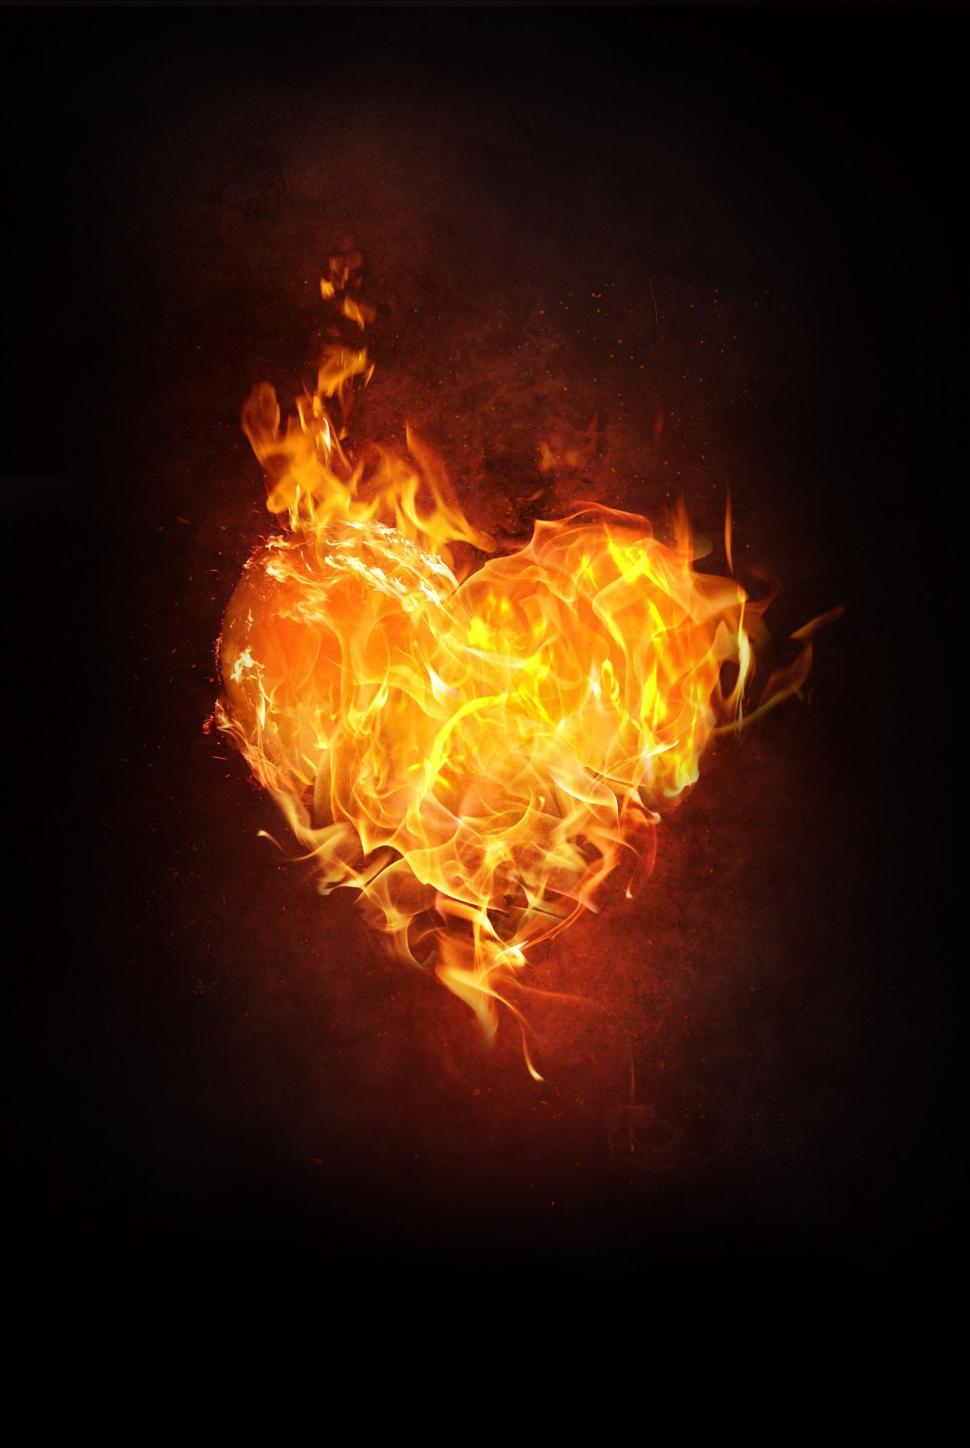 Free Image of Fiery Heart on Black Background 